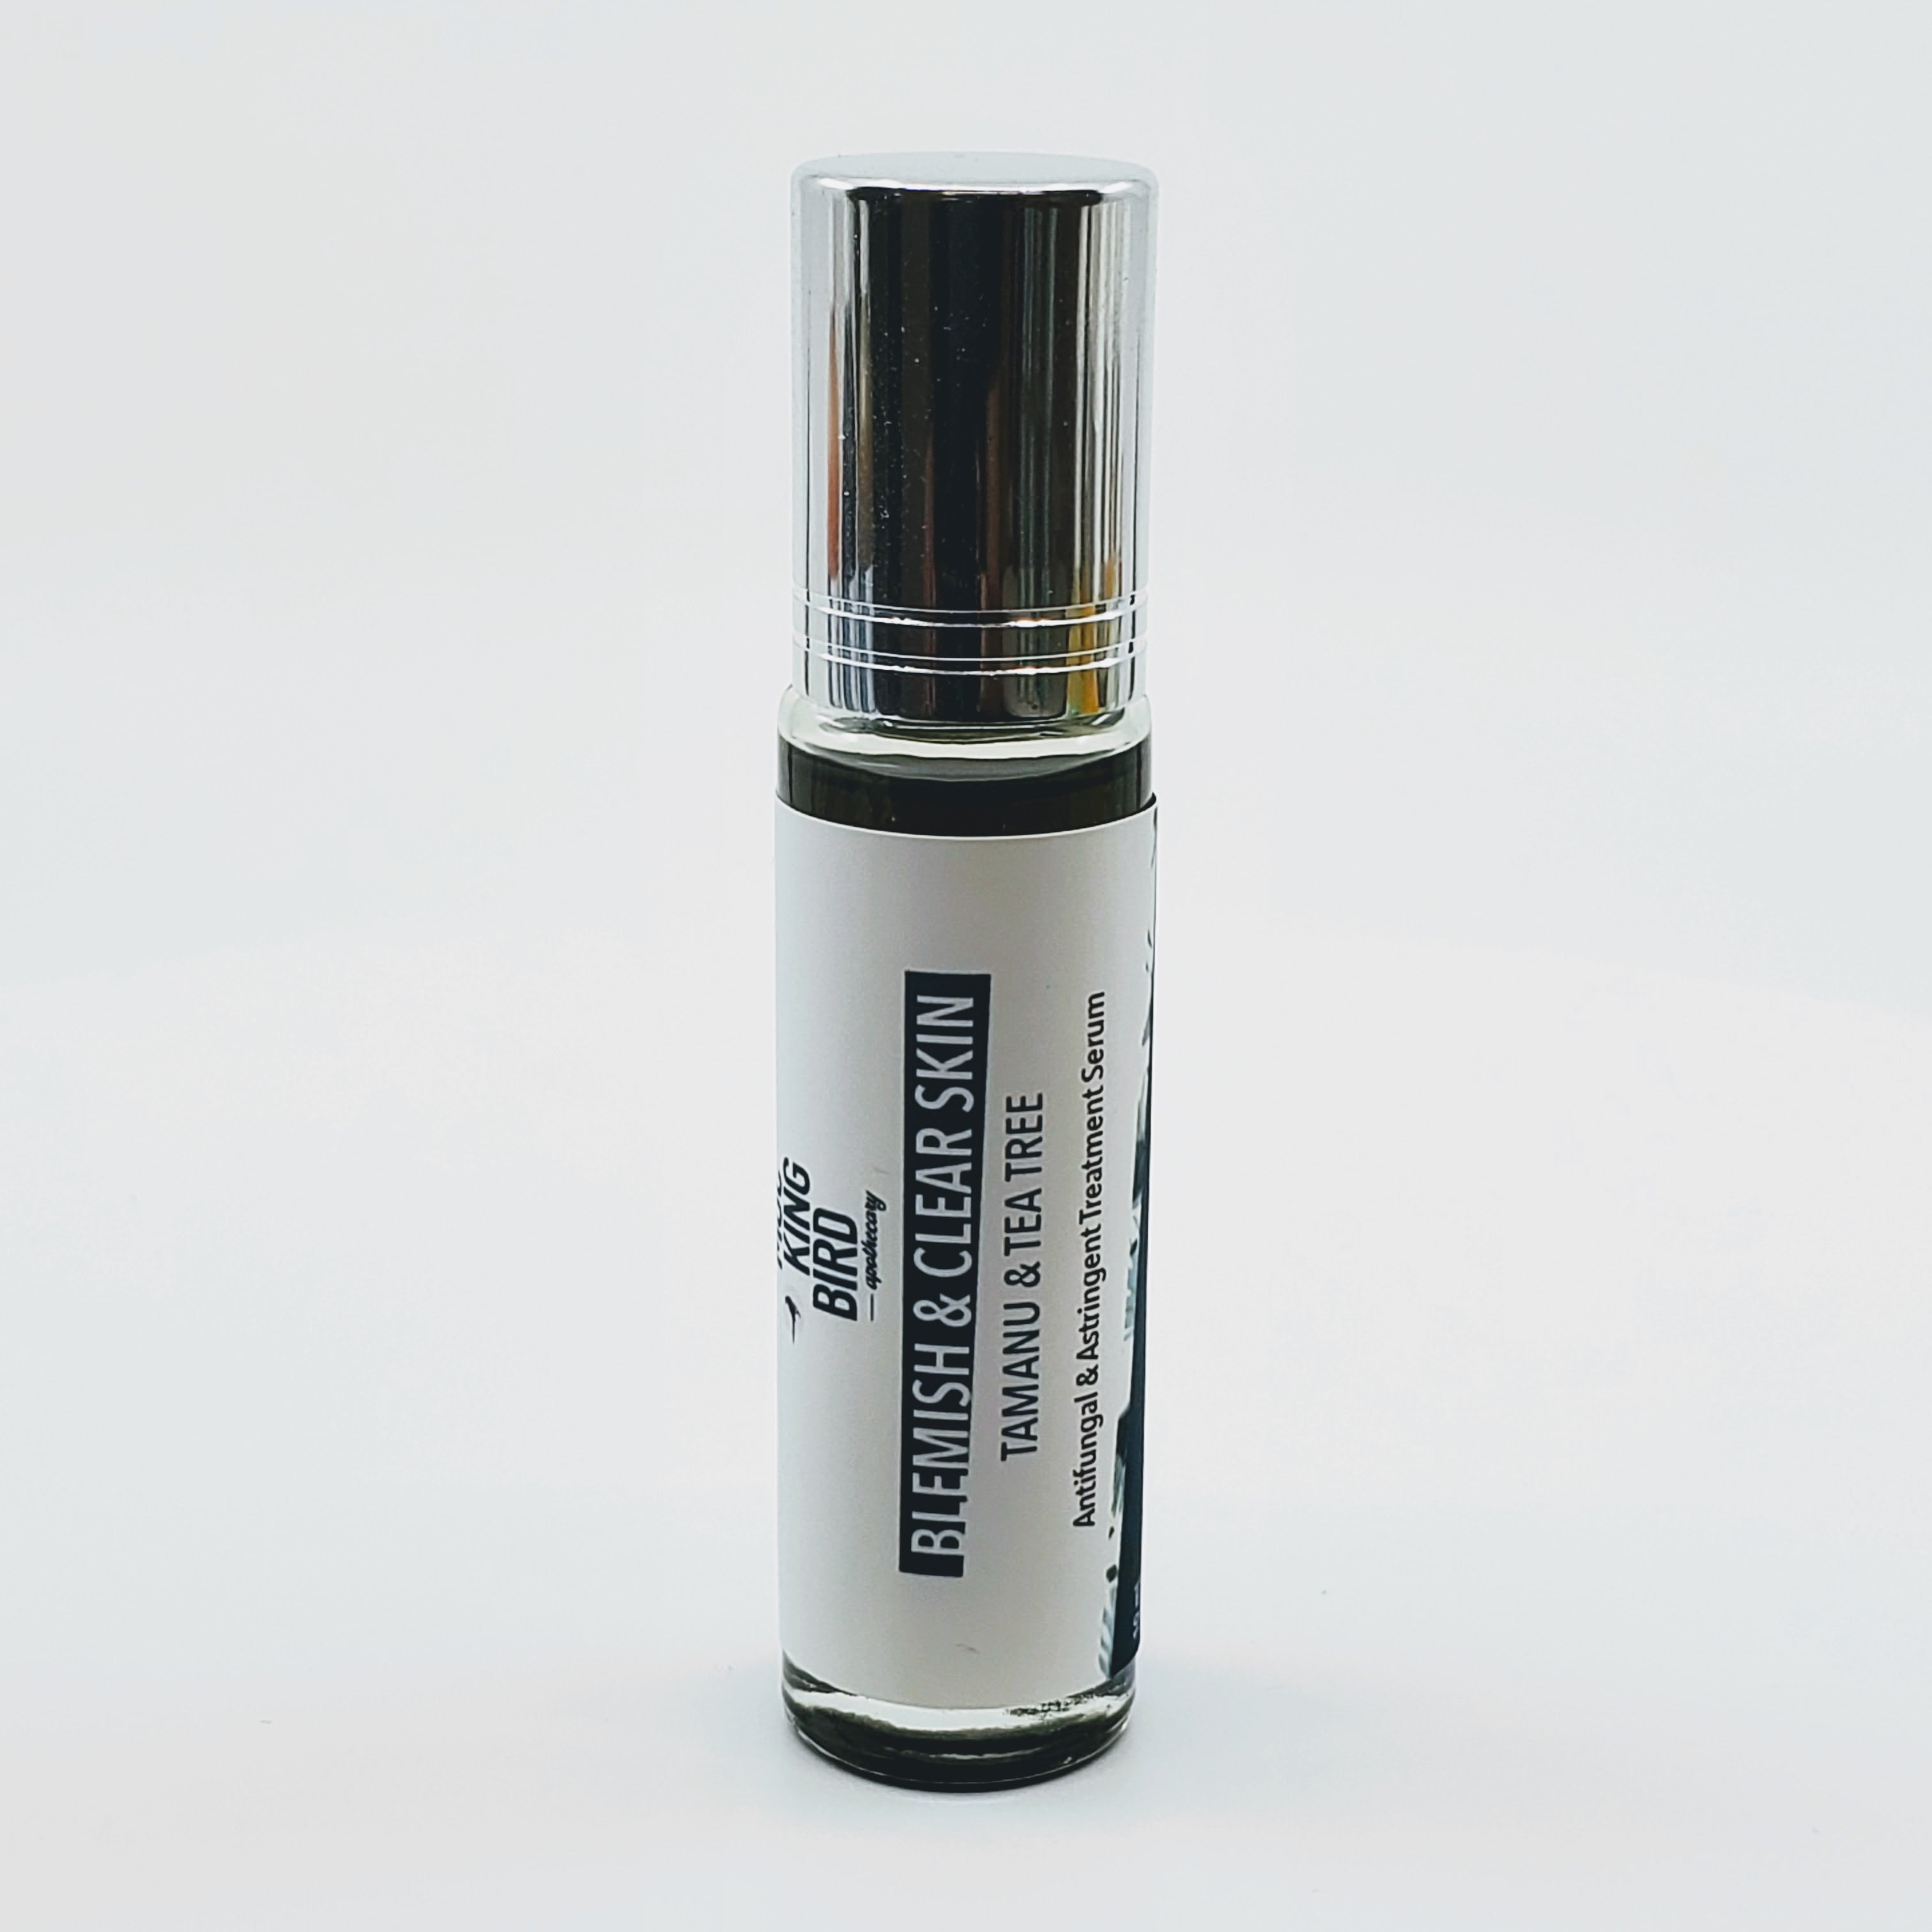 Blemish & Clear Skin Treatment Serum Rollerball - The Mockingbird Apothecary & General Store